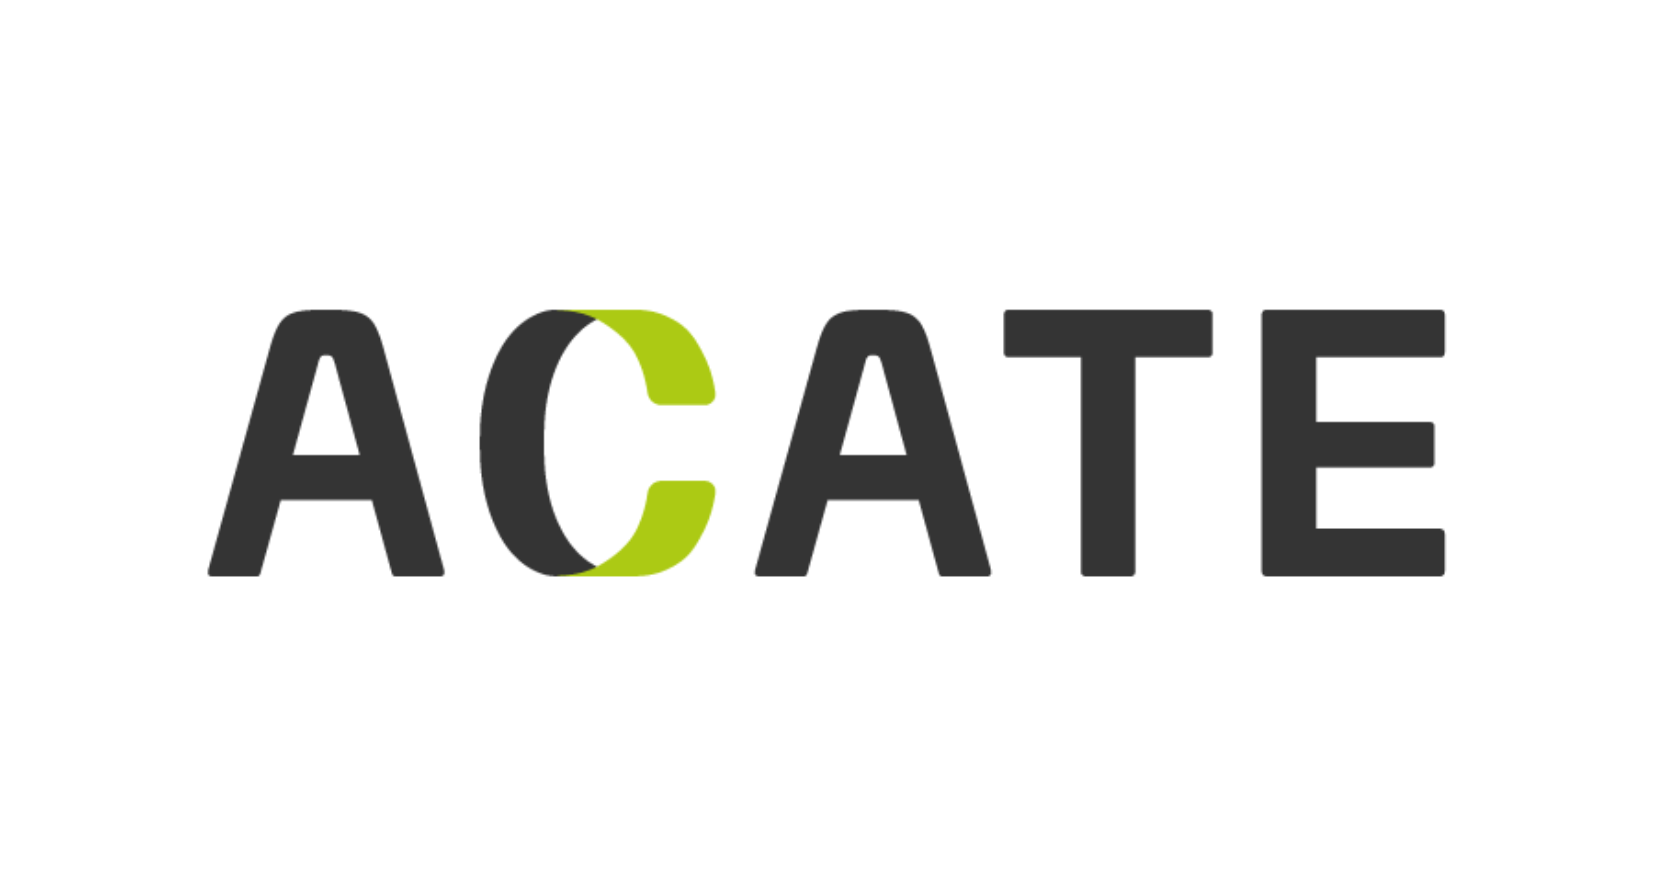 ACATE